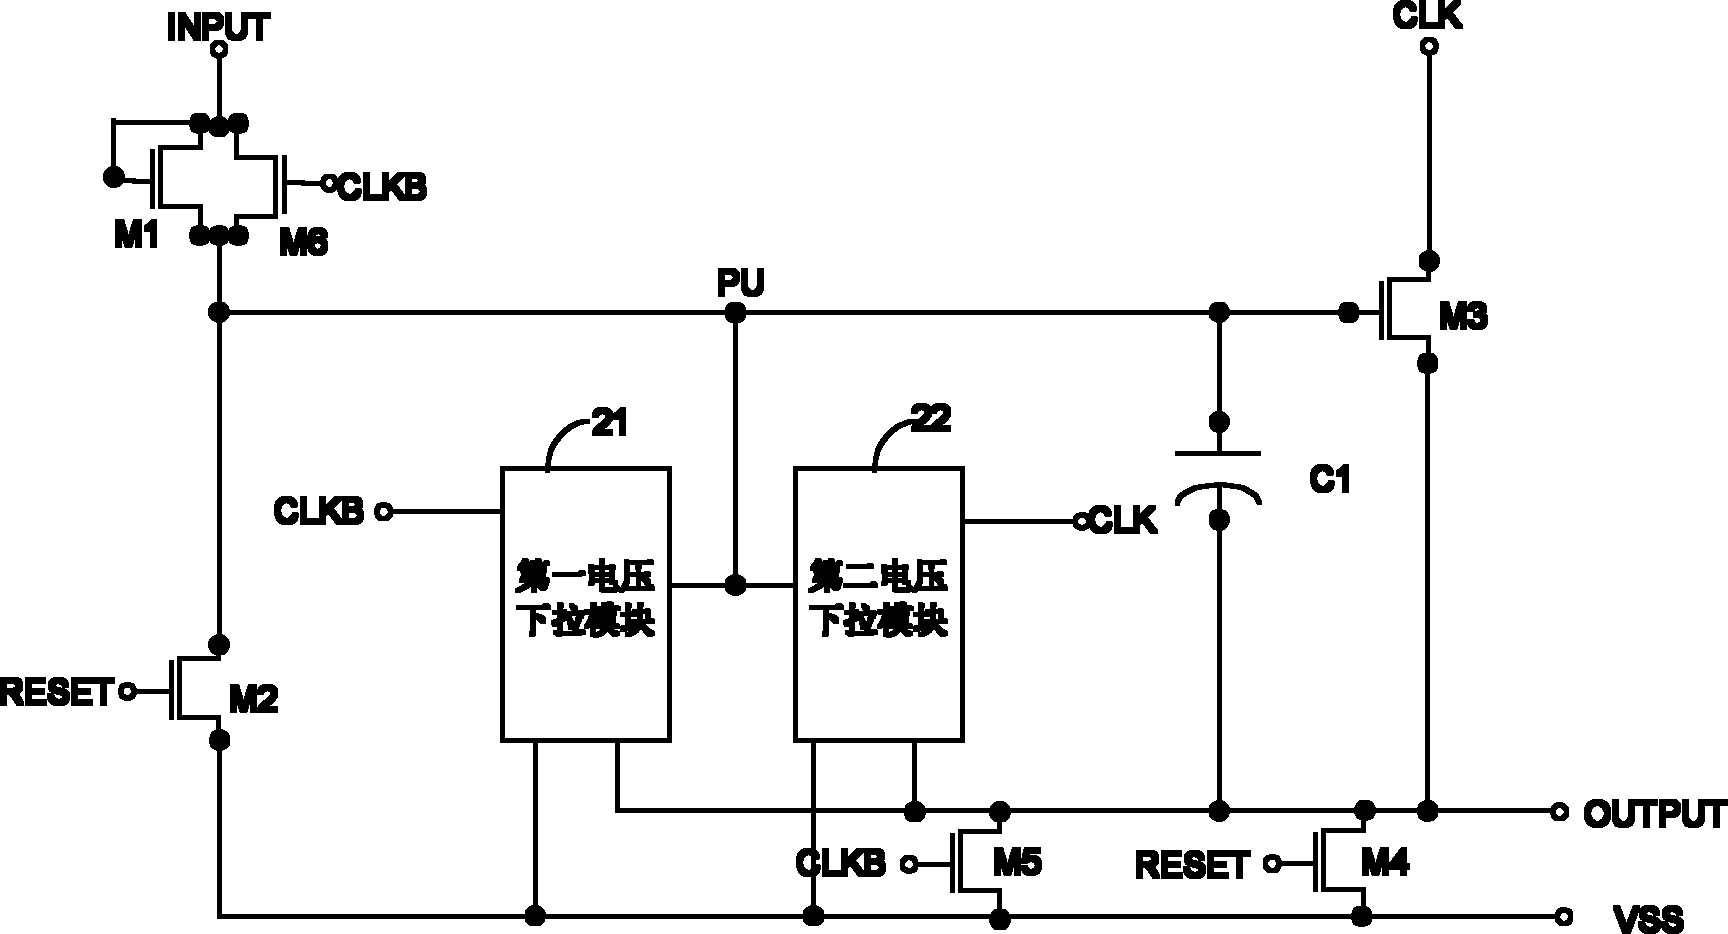 GOA (Gate Driver on Array) circuit, array base plate and liquid crystal display device